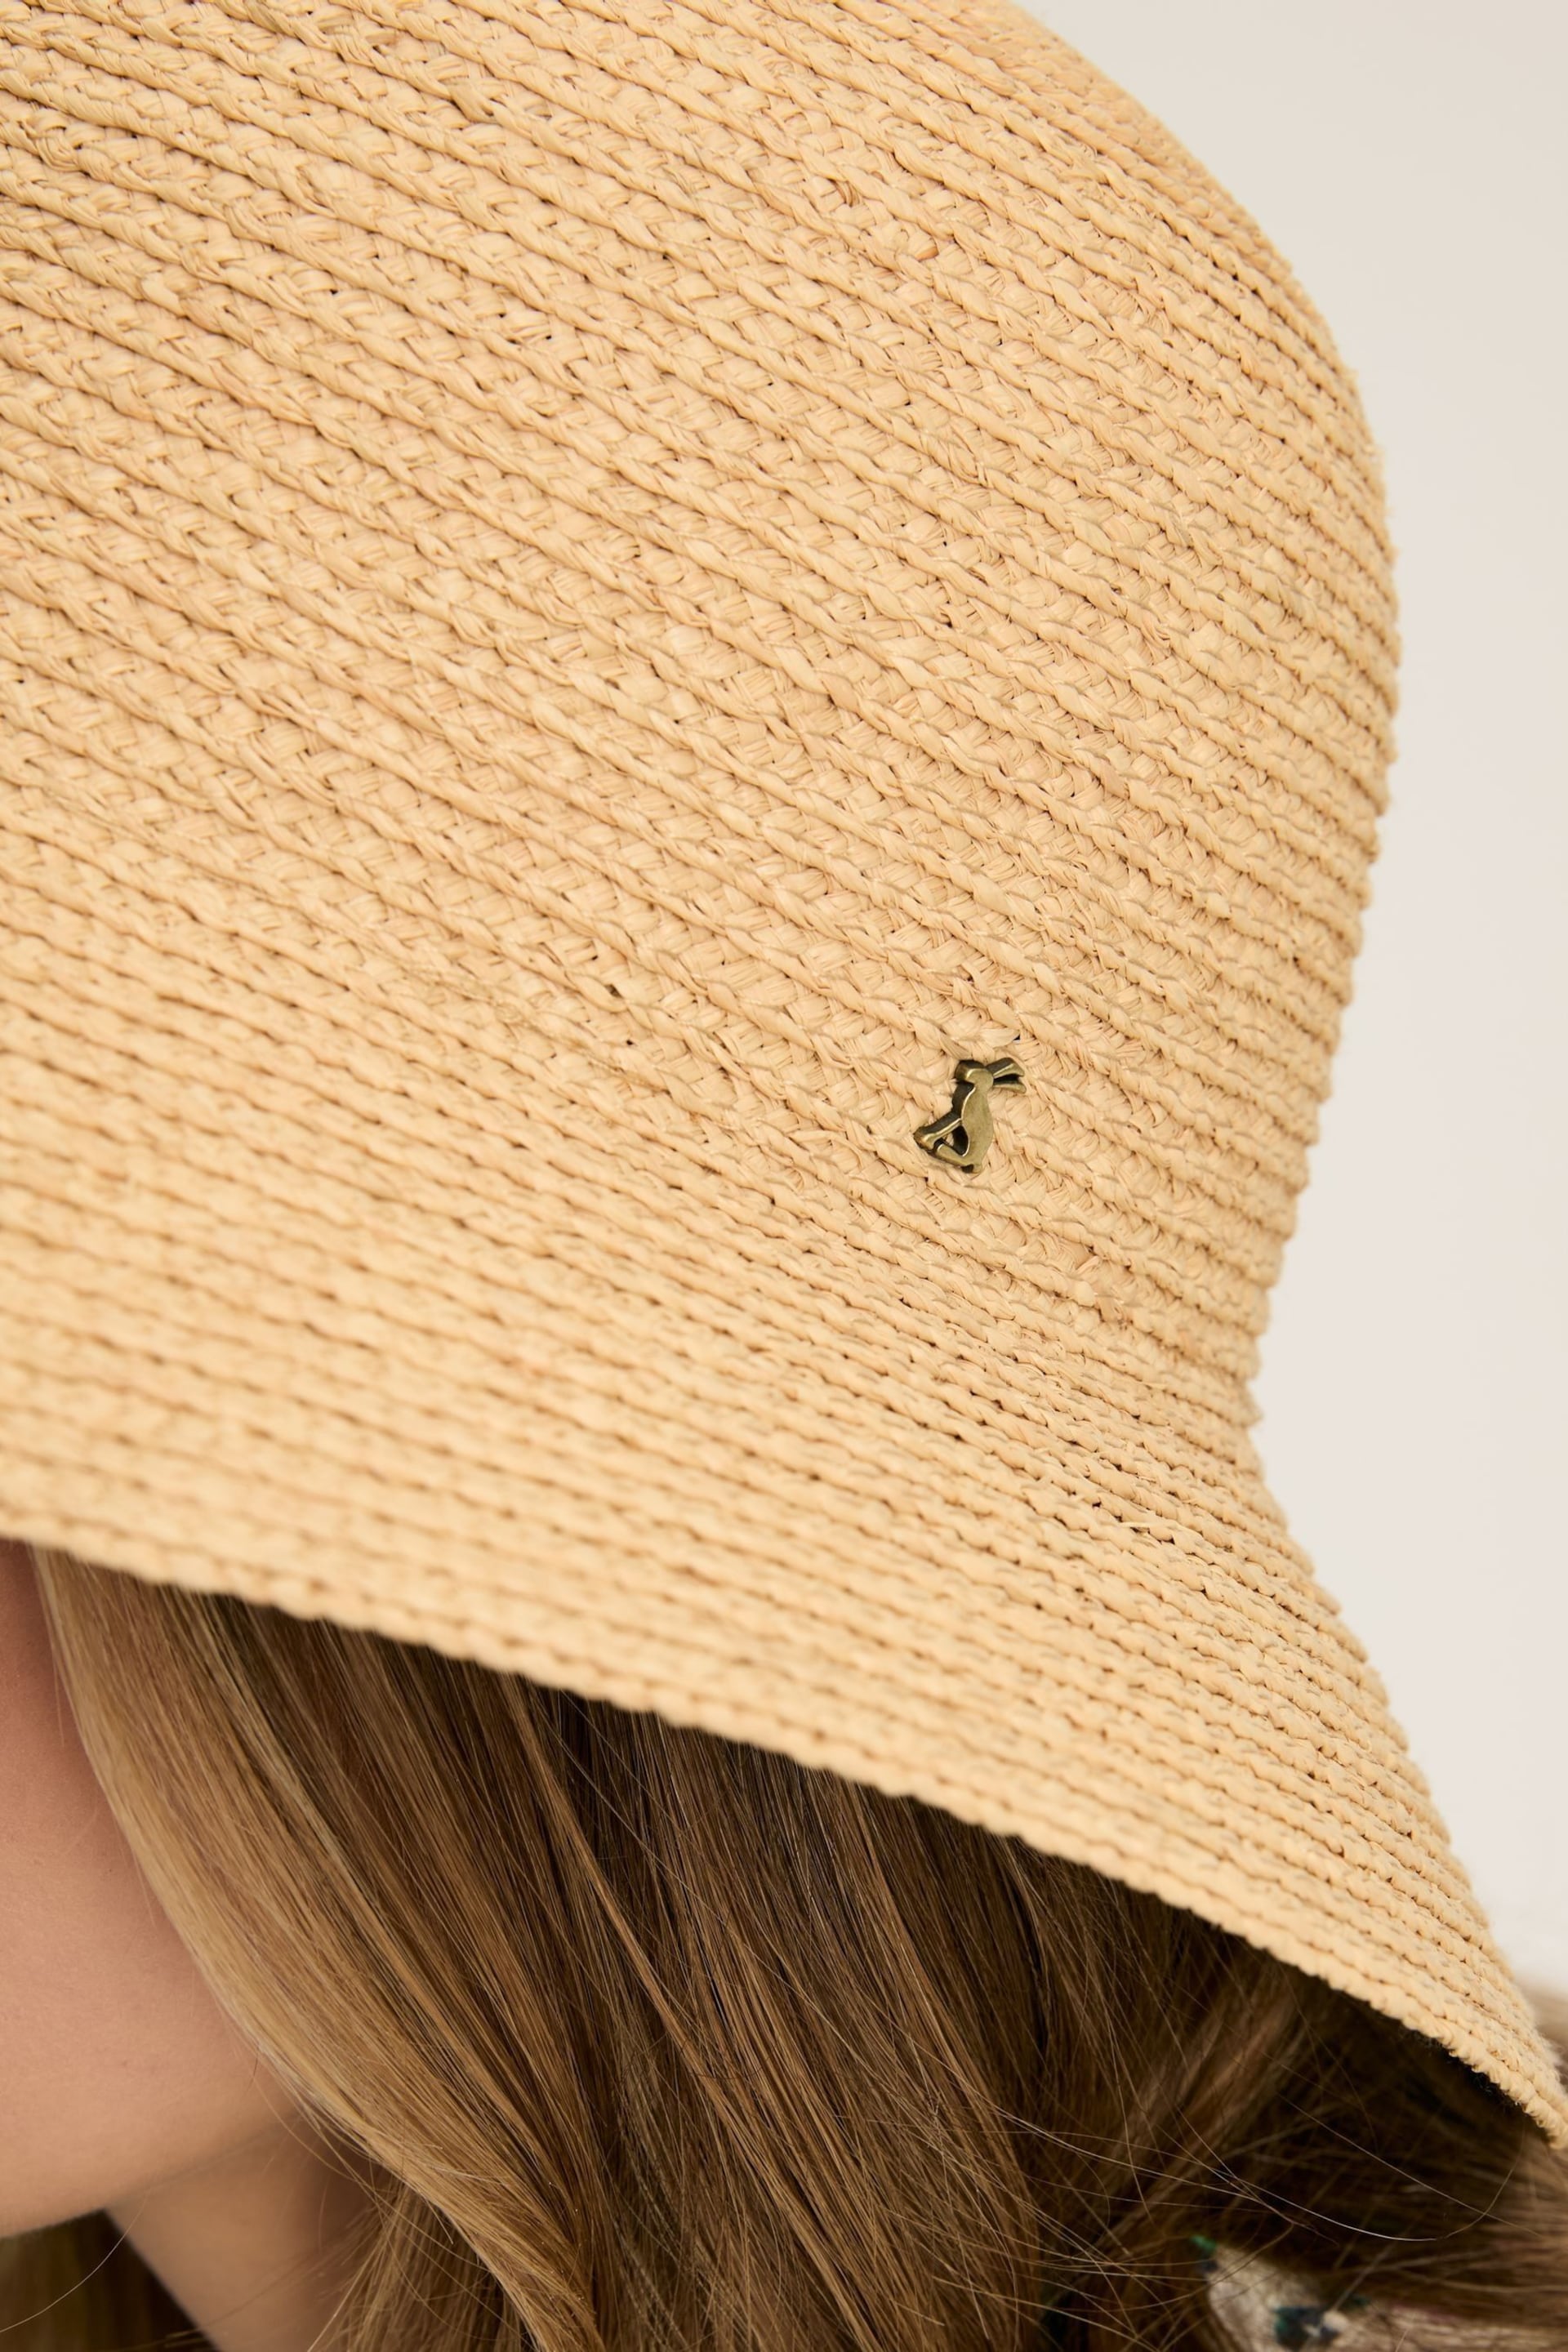 Joules Albany Natural Straw Cloche Hat - Image 4 of 5